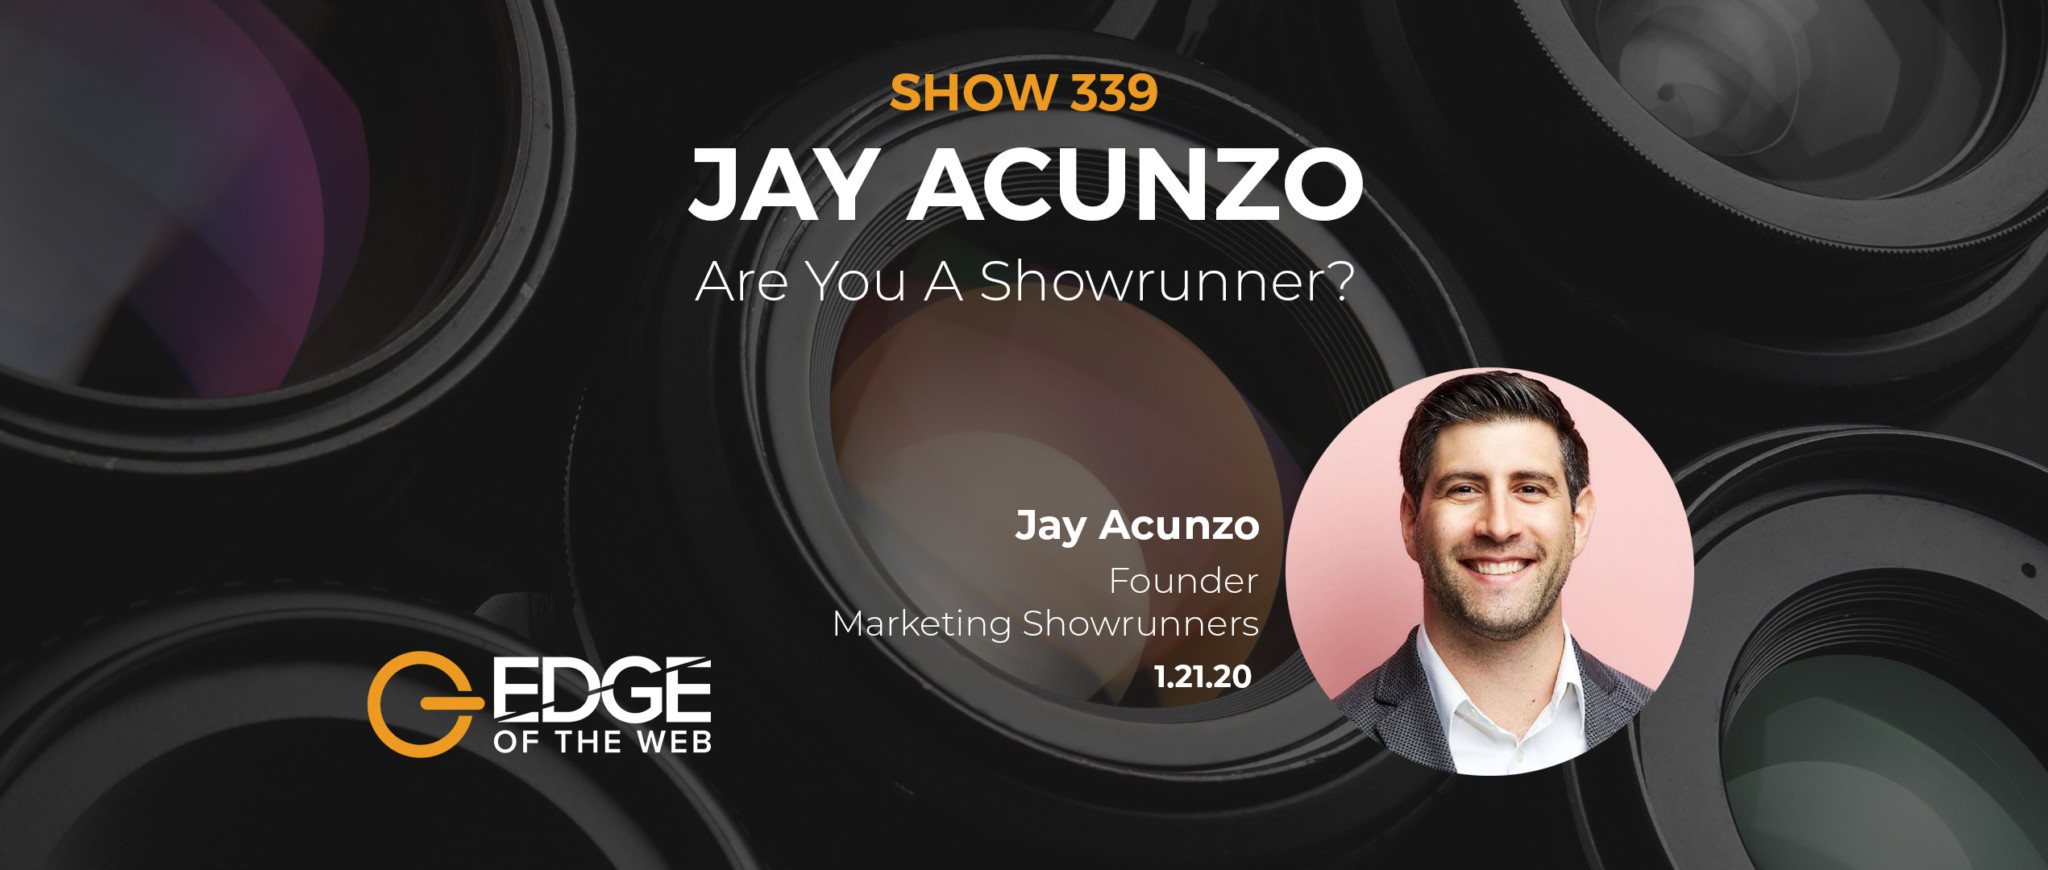 Show 339: Are you a showrunner? Featuring Jay Acunzo